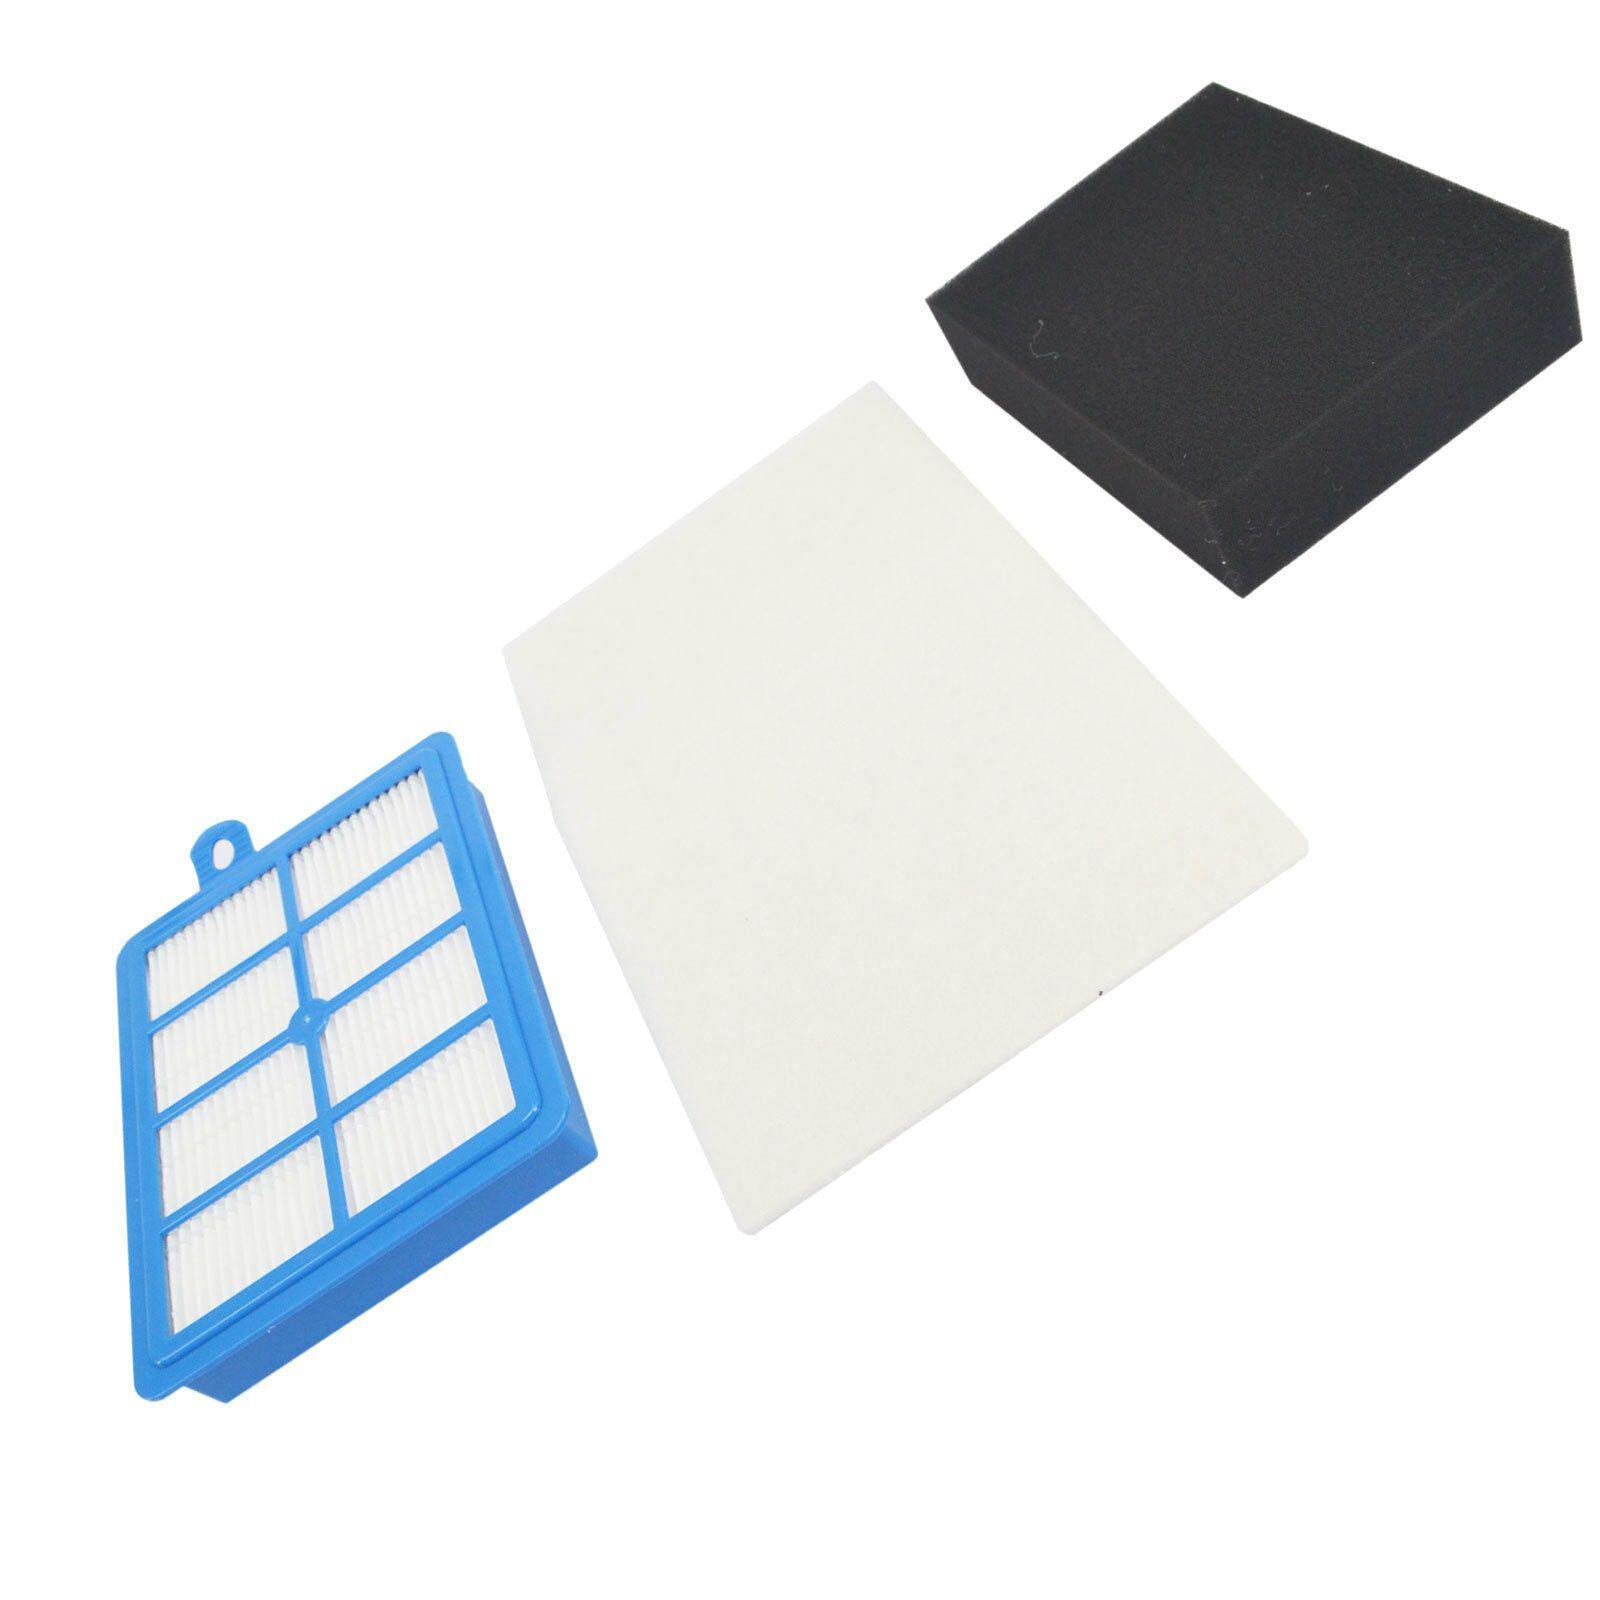 Hepa Filter Starter kit For Electrolux Super Cyclone ZSC6930, 903151639 Sparesbarn